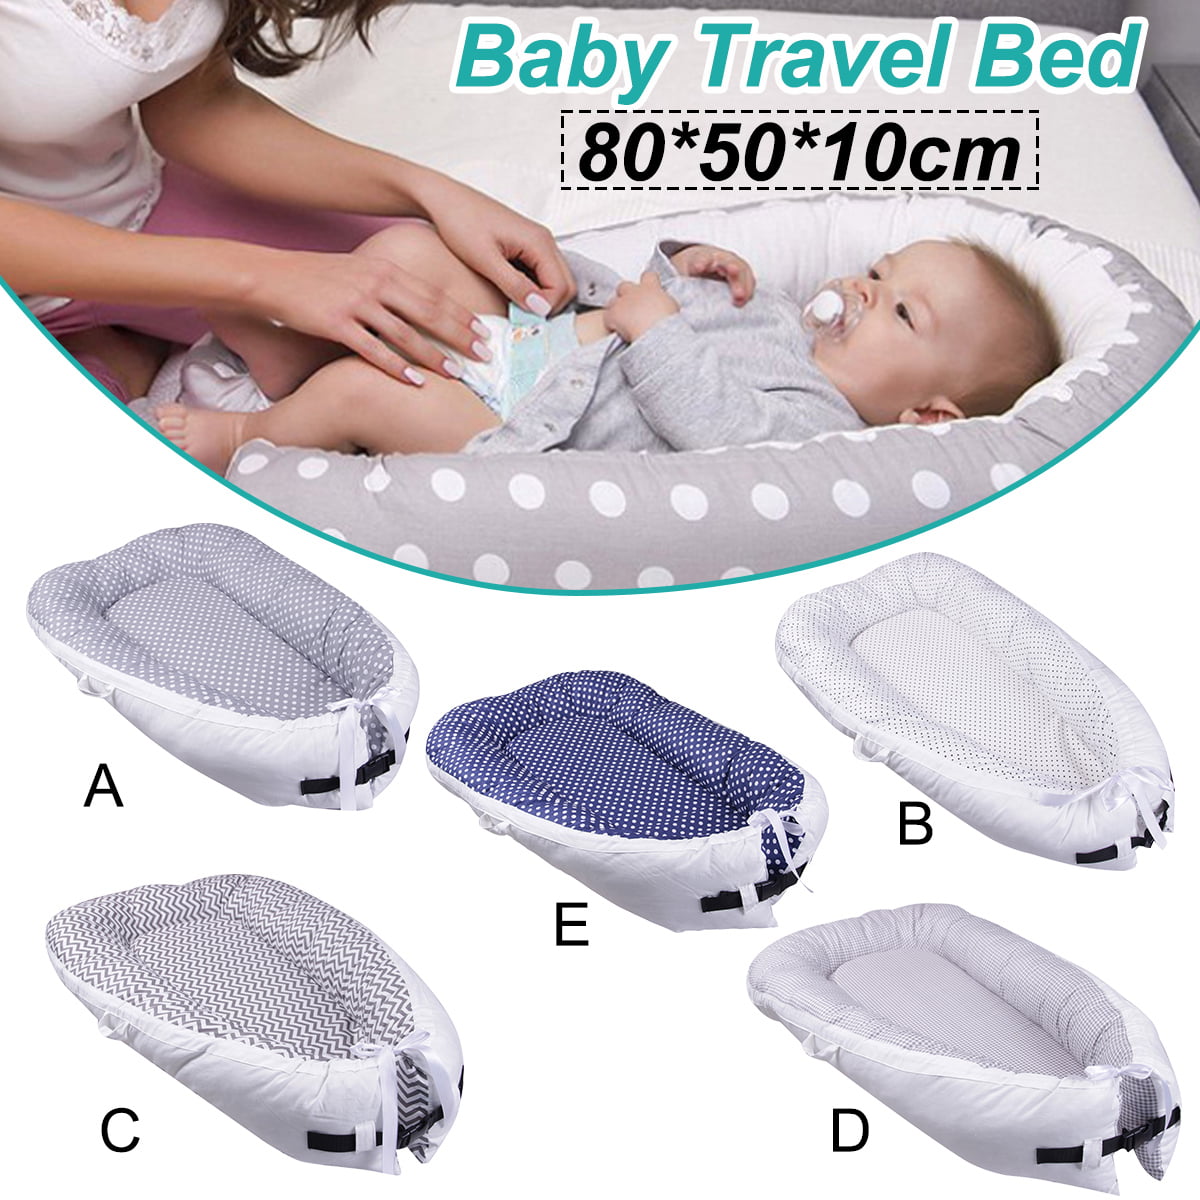 Newborn Baby Nest,Baby Bionic Bed Baby Lounger Soft Cotton Portable Breathable Newborn Infant Bassinet Removable and Washable Children Bed Co-Sleeping Bedroom/Travel/Camping